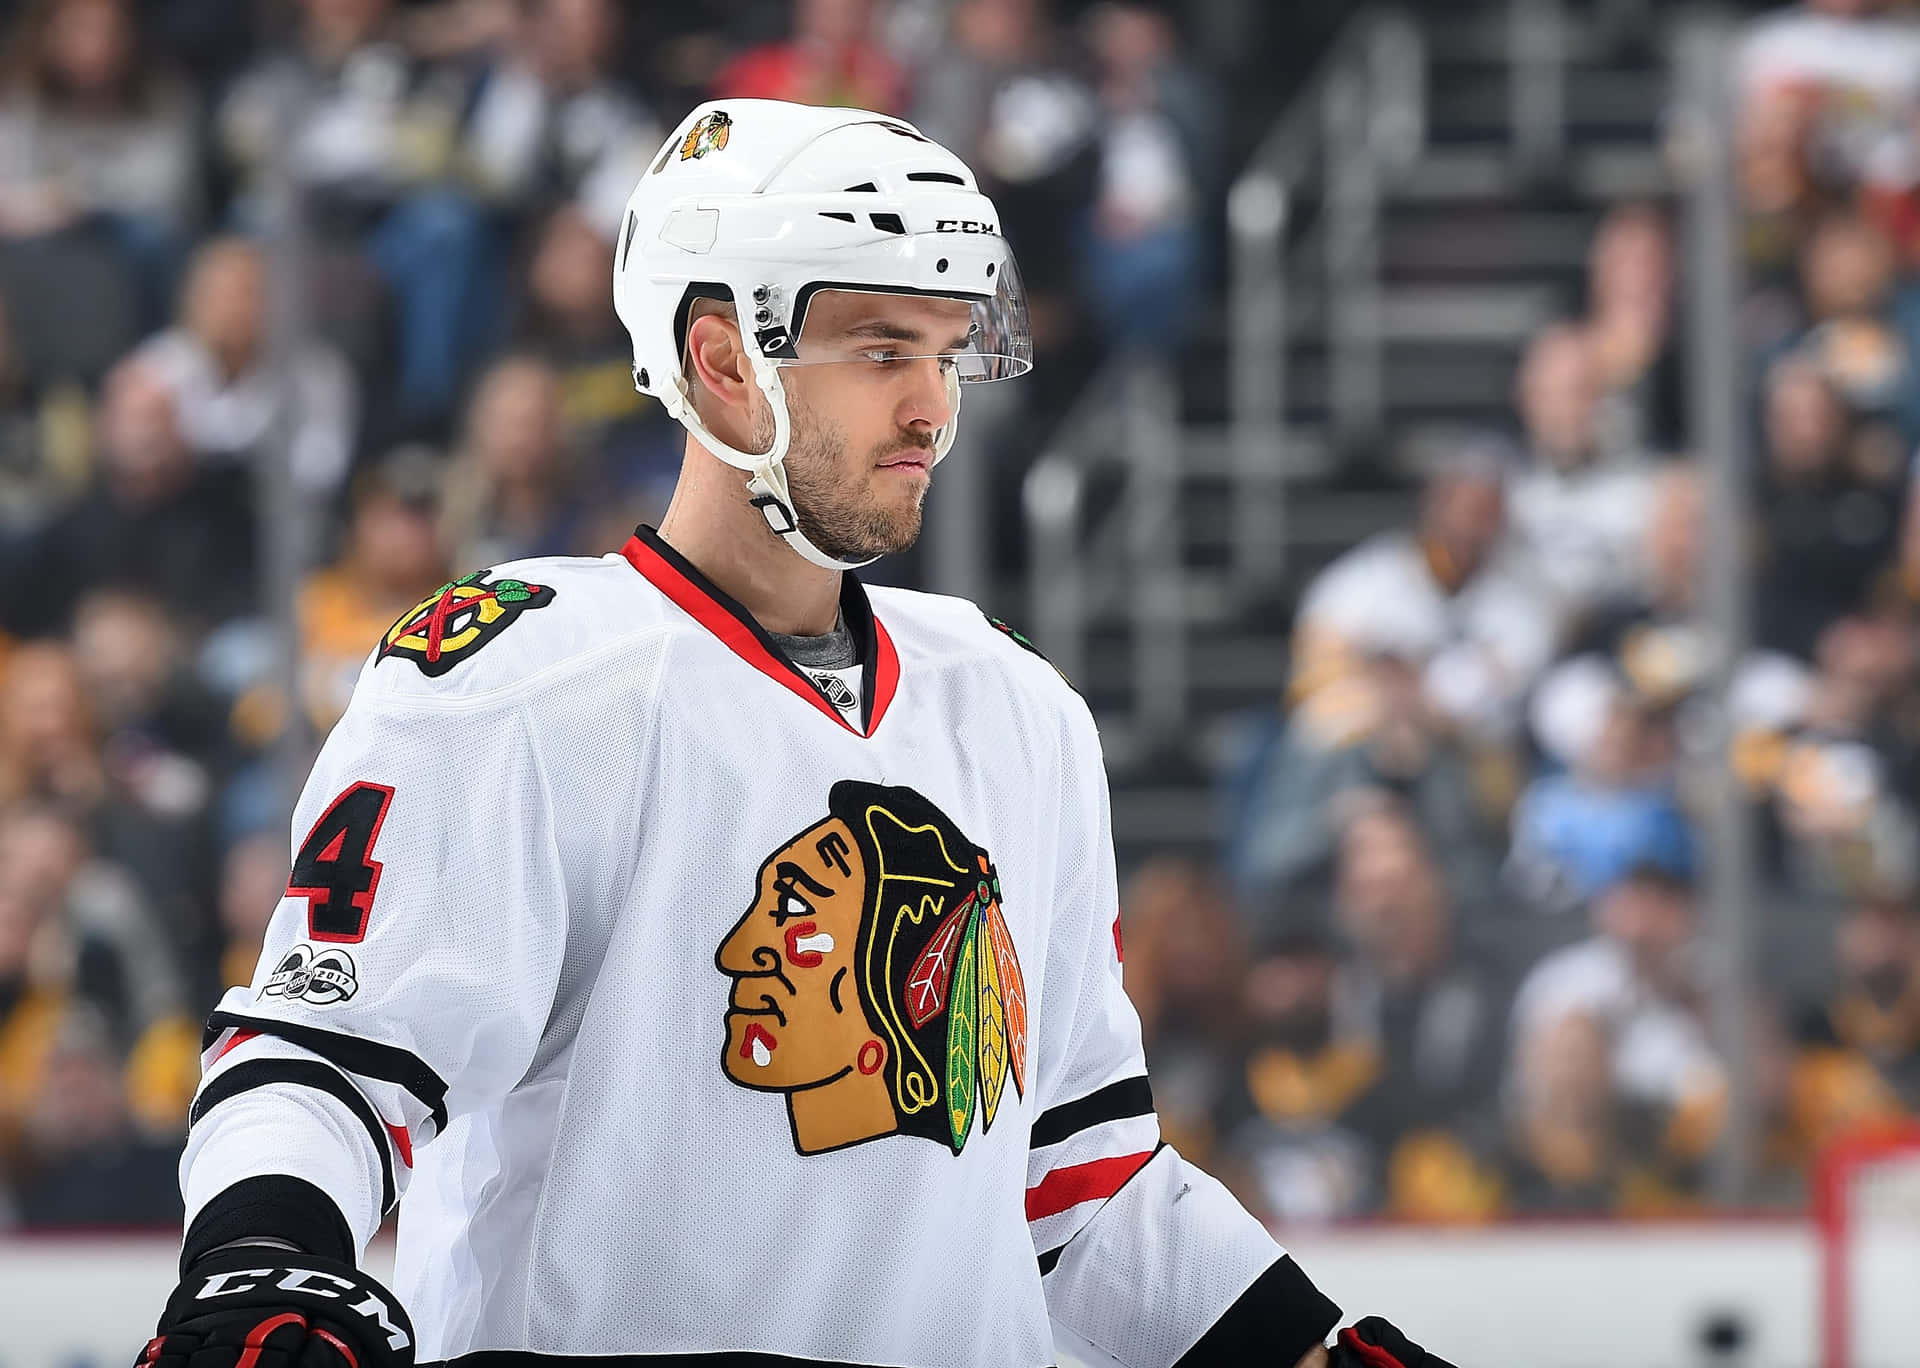 Exceptional Defenseman Marc-Edouard Vlasic of the Chicago Hawks In-Game Action Wallpaper